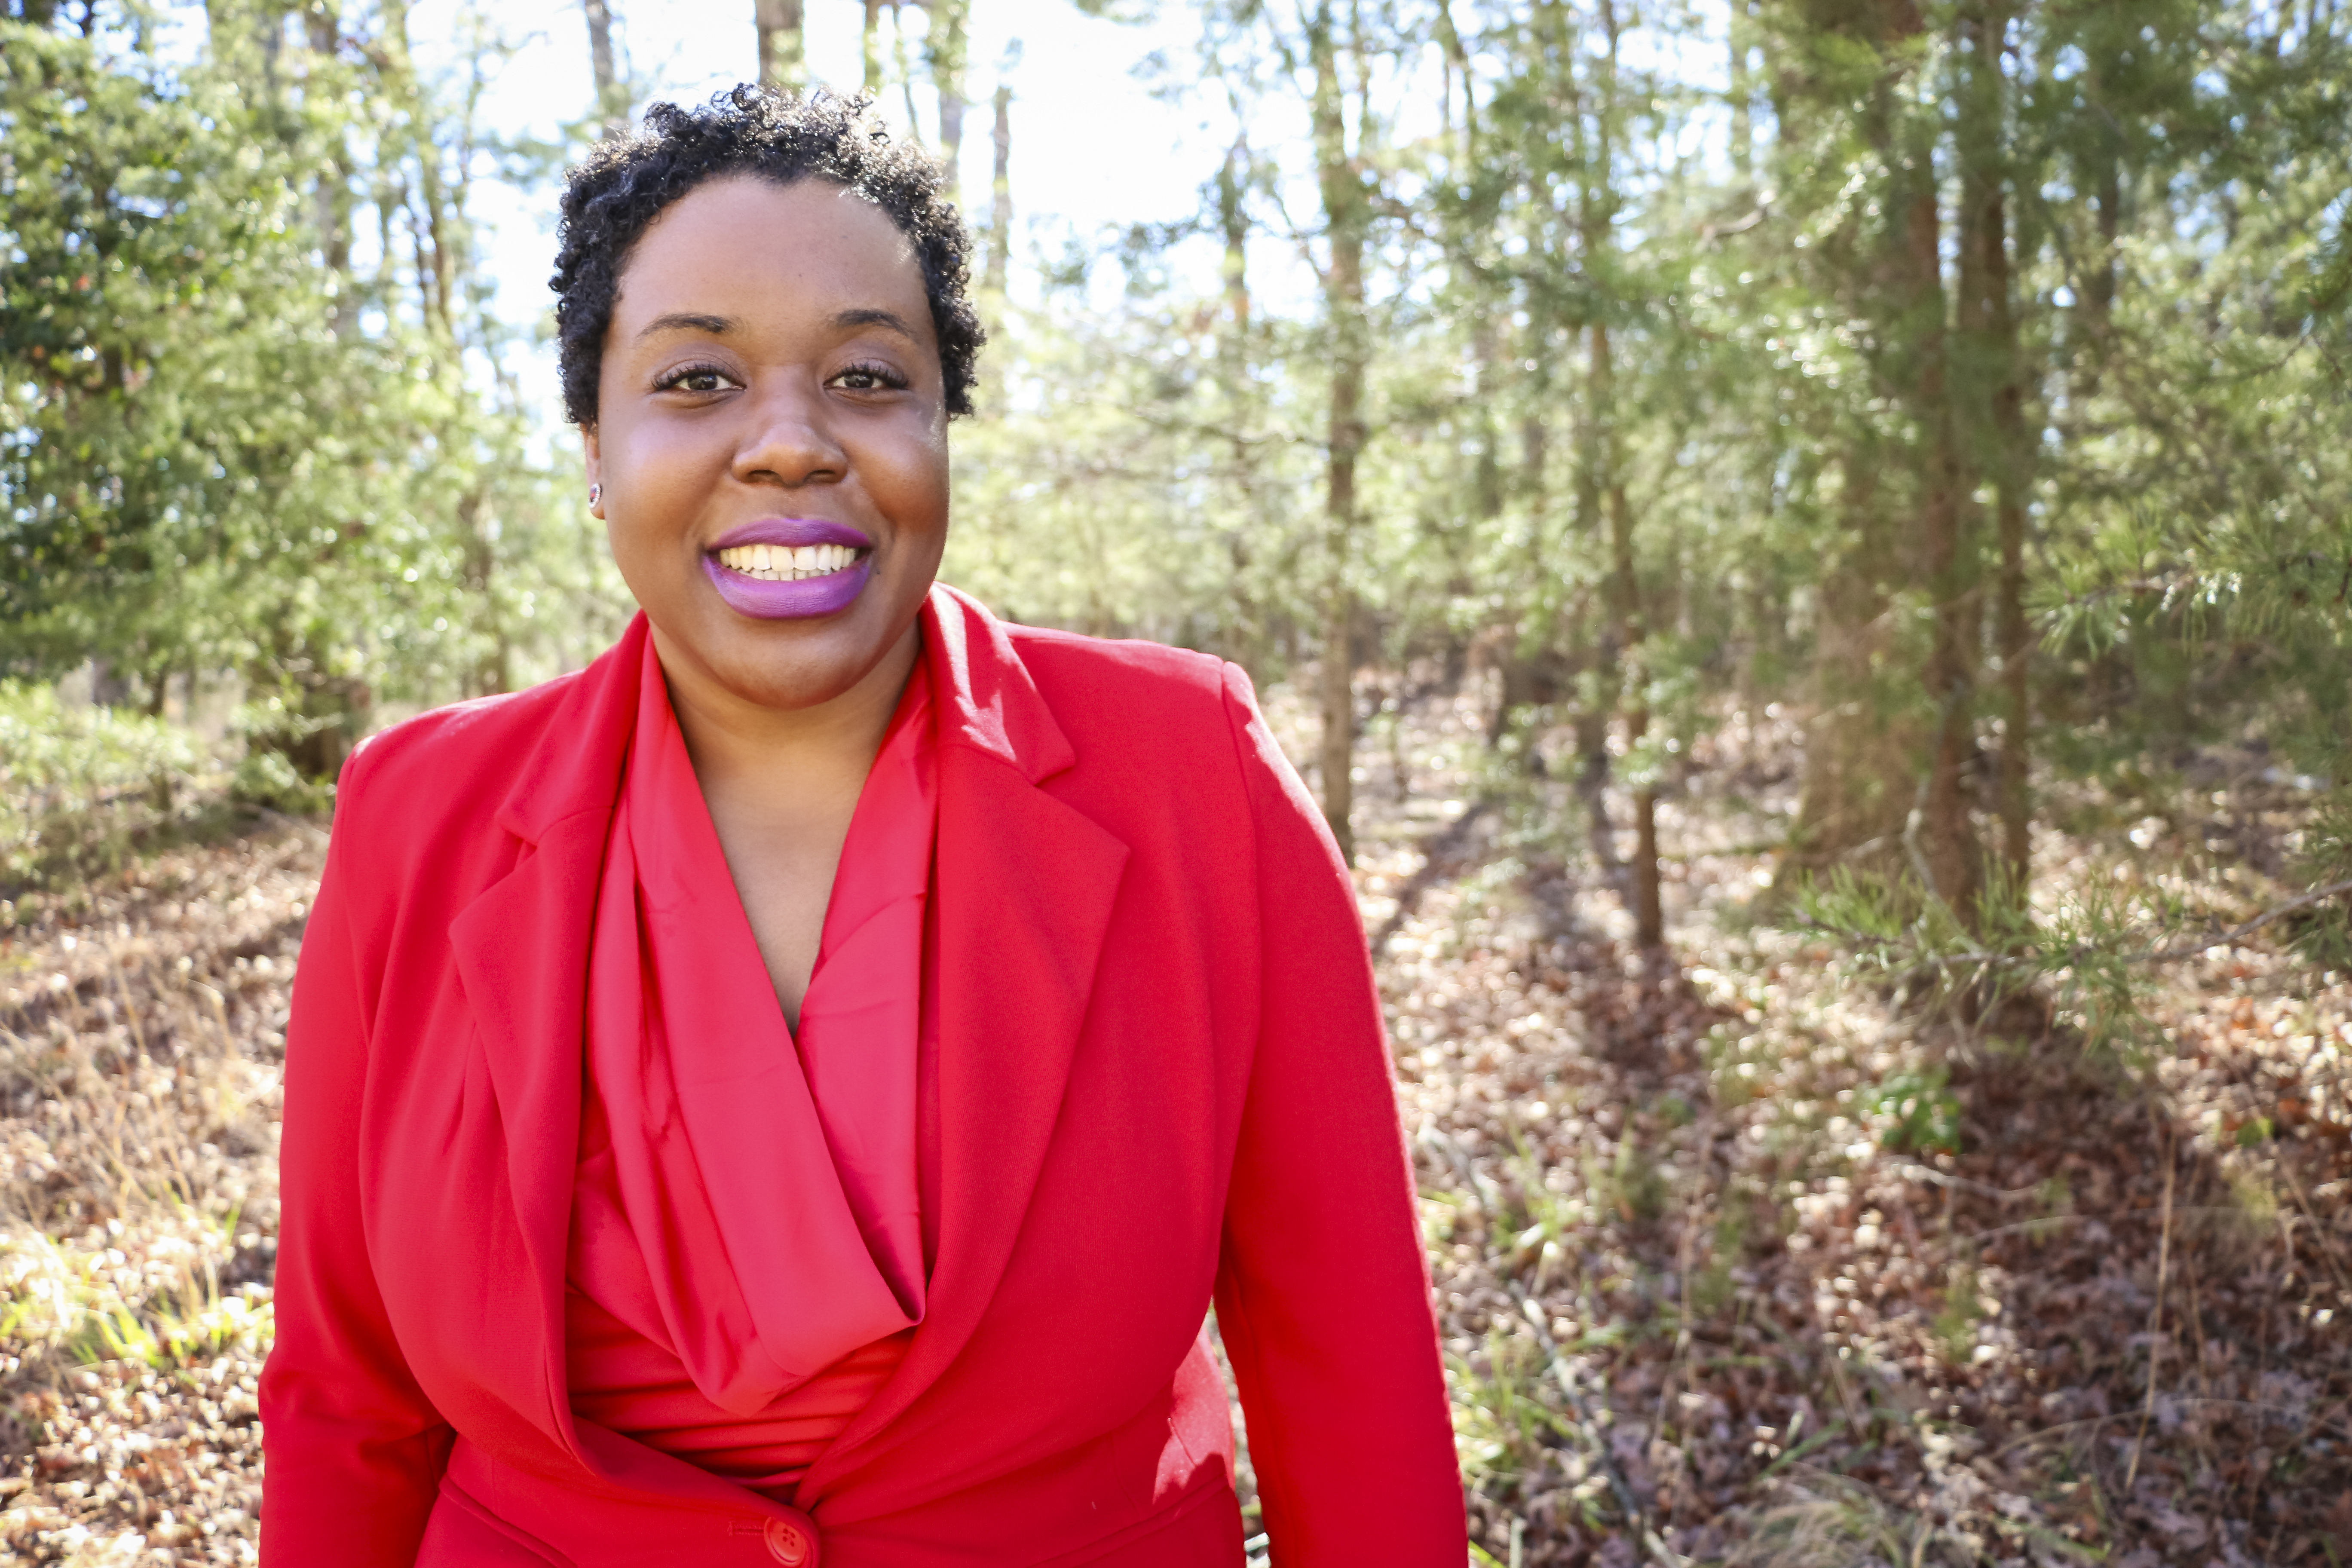 A woman that's standing in the woods wearing a red blouse and red suit jacket smiles widely at the camera.